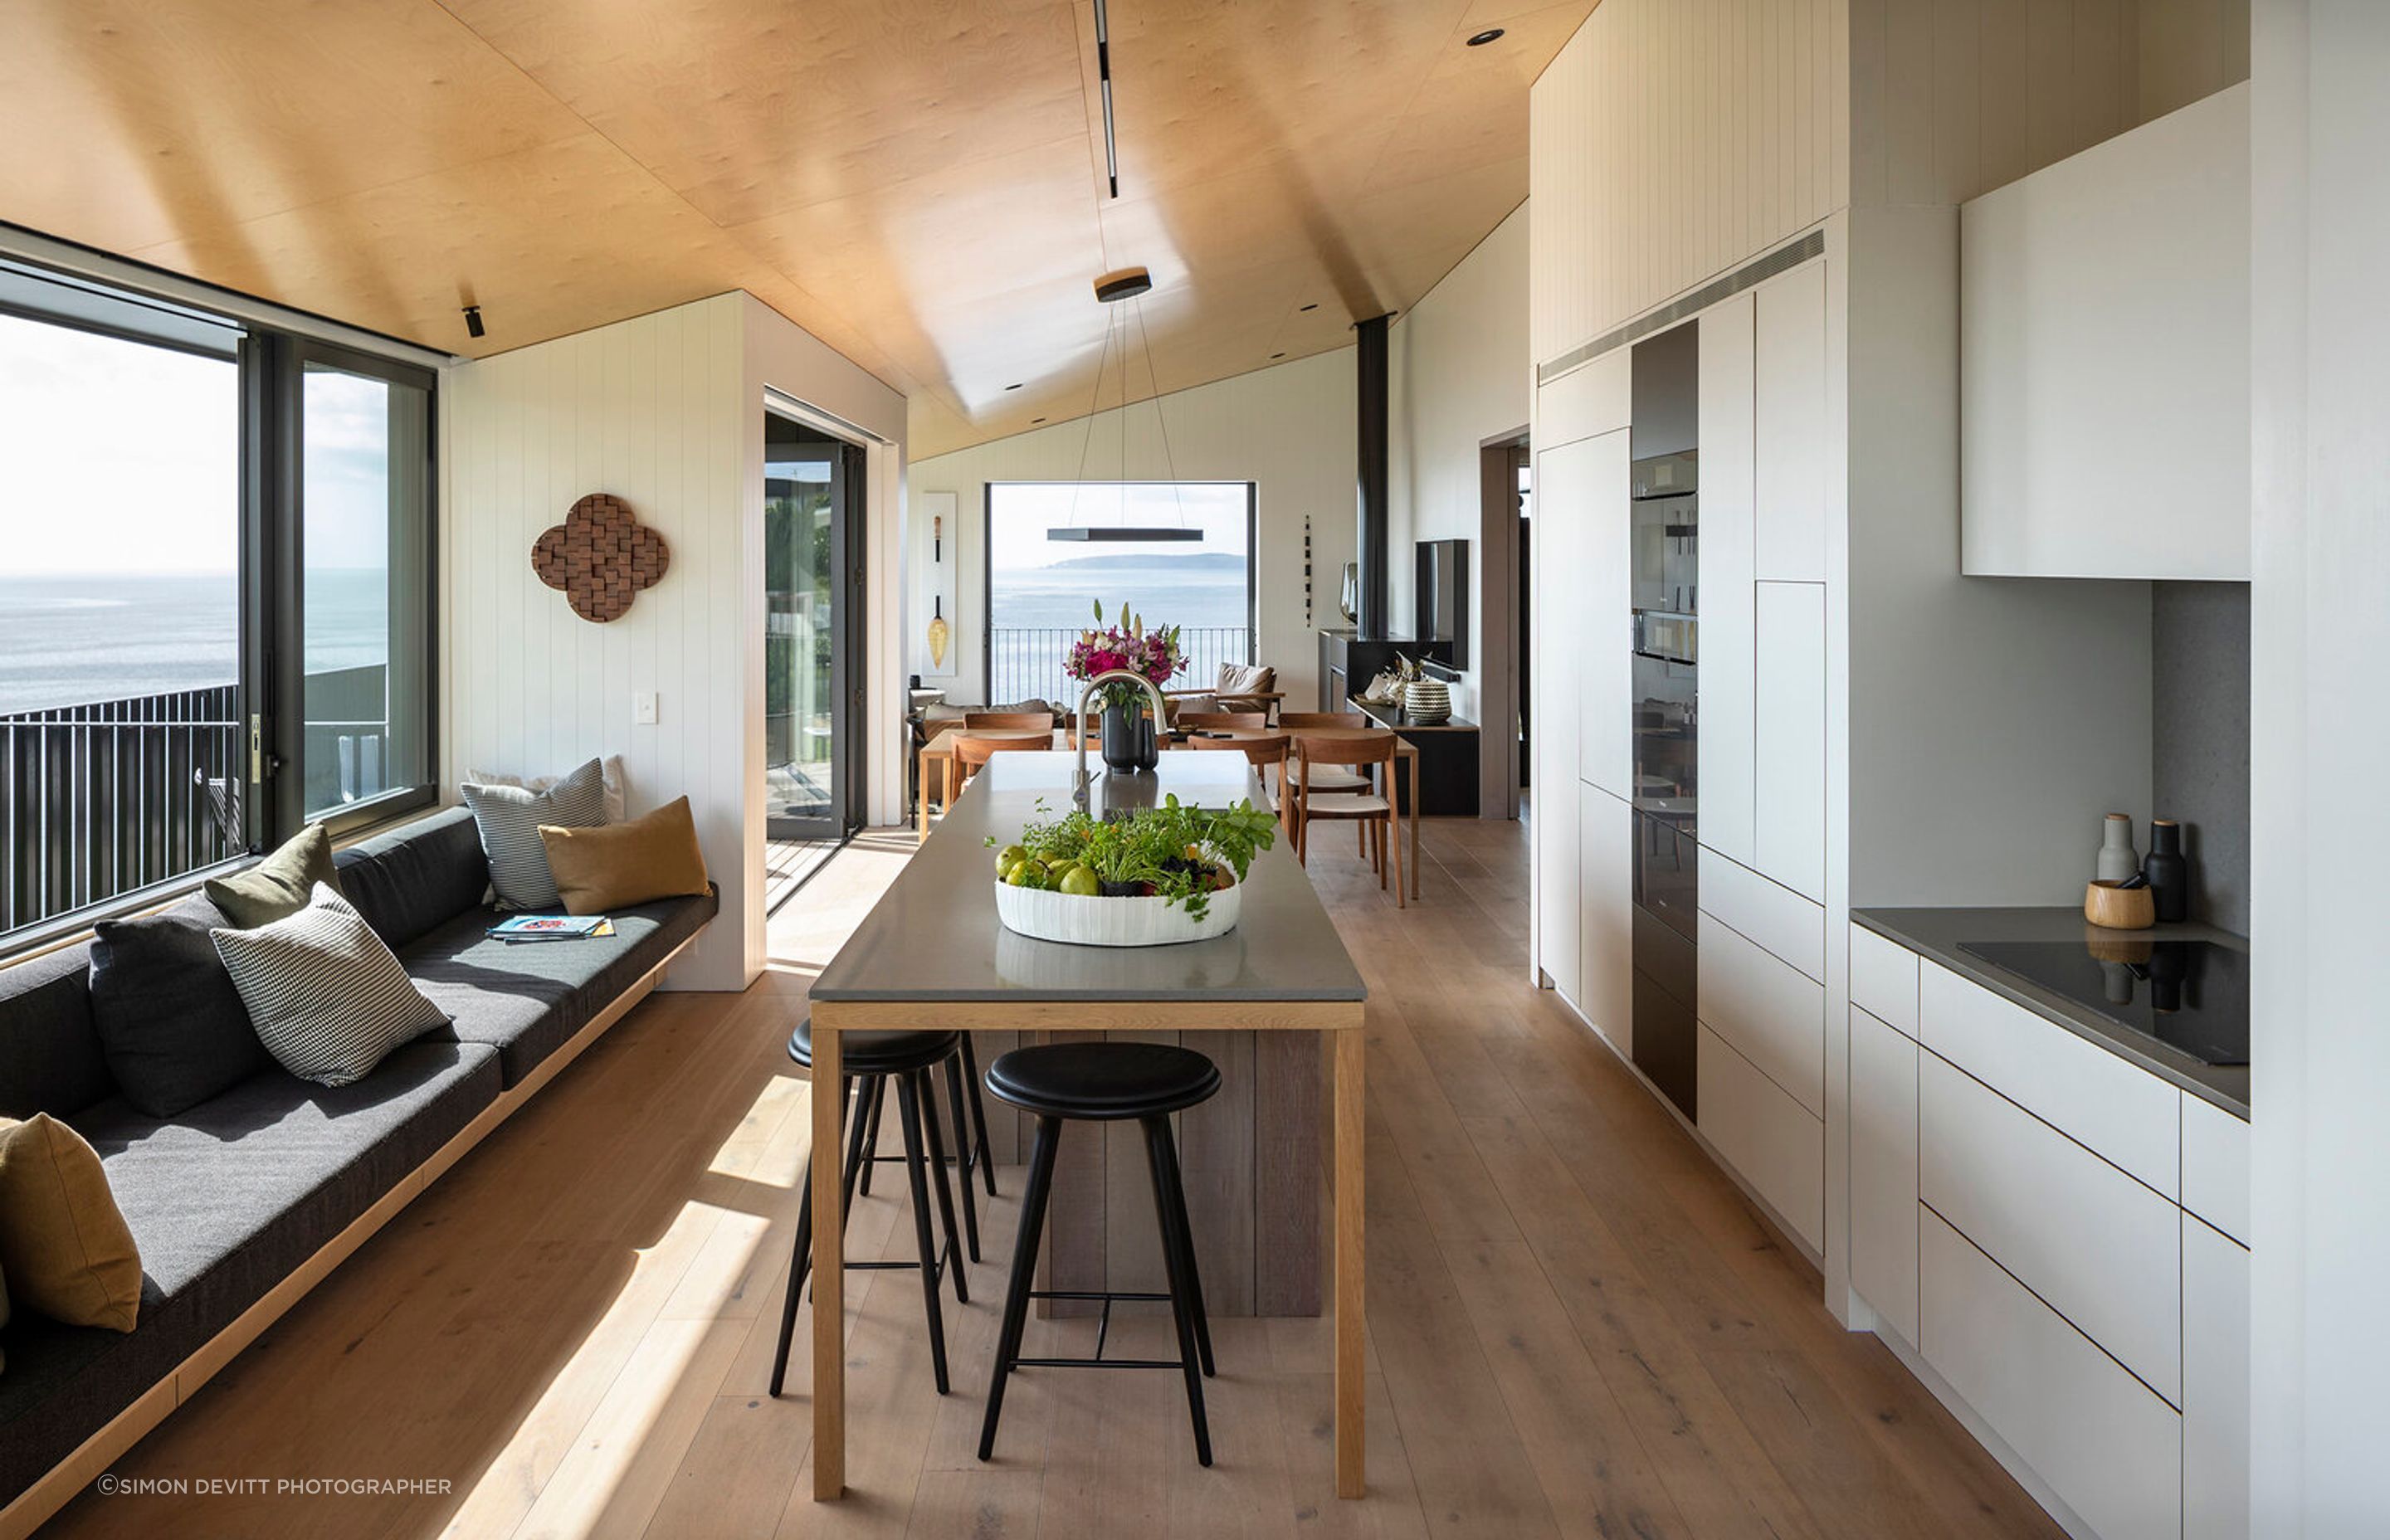 Running roughly north-south, the open-plan living area is bathed in natural light and enjoys ample cross ventilation thanks to the split cruciform design of the building.